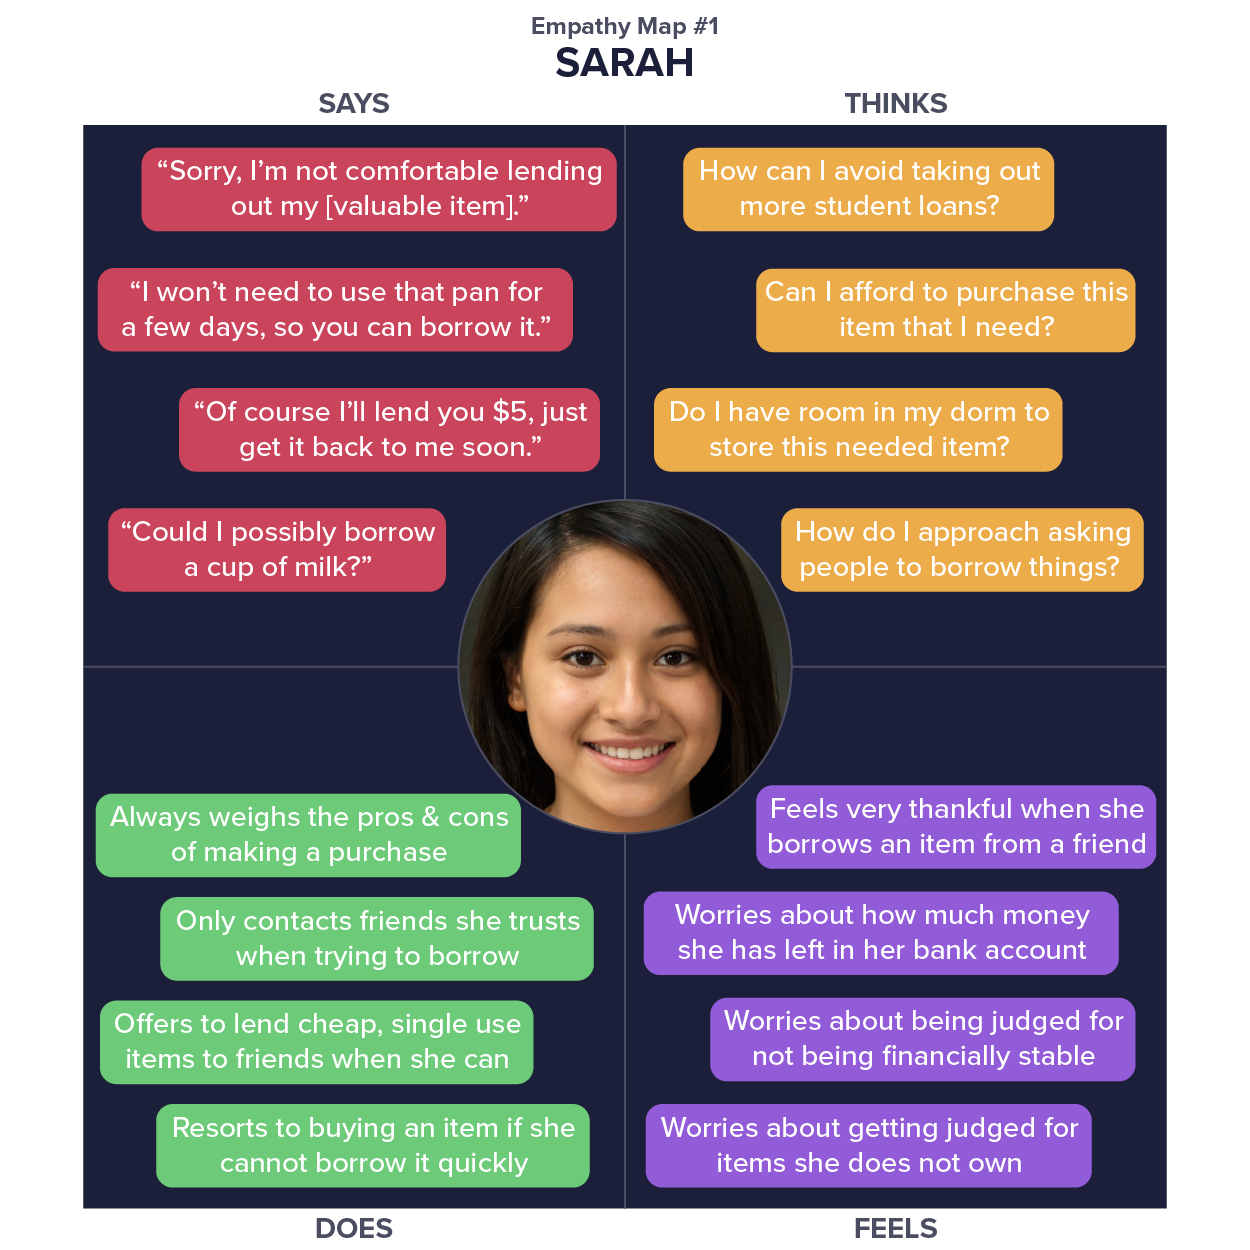 Empathy map for the Sarah persona